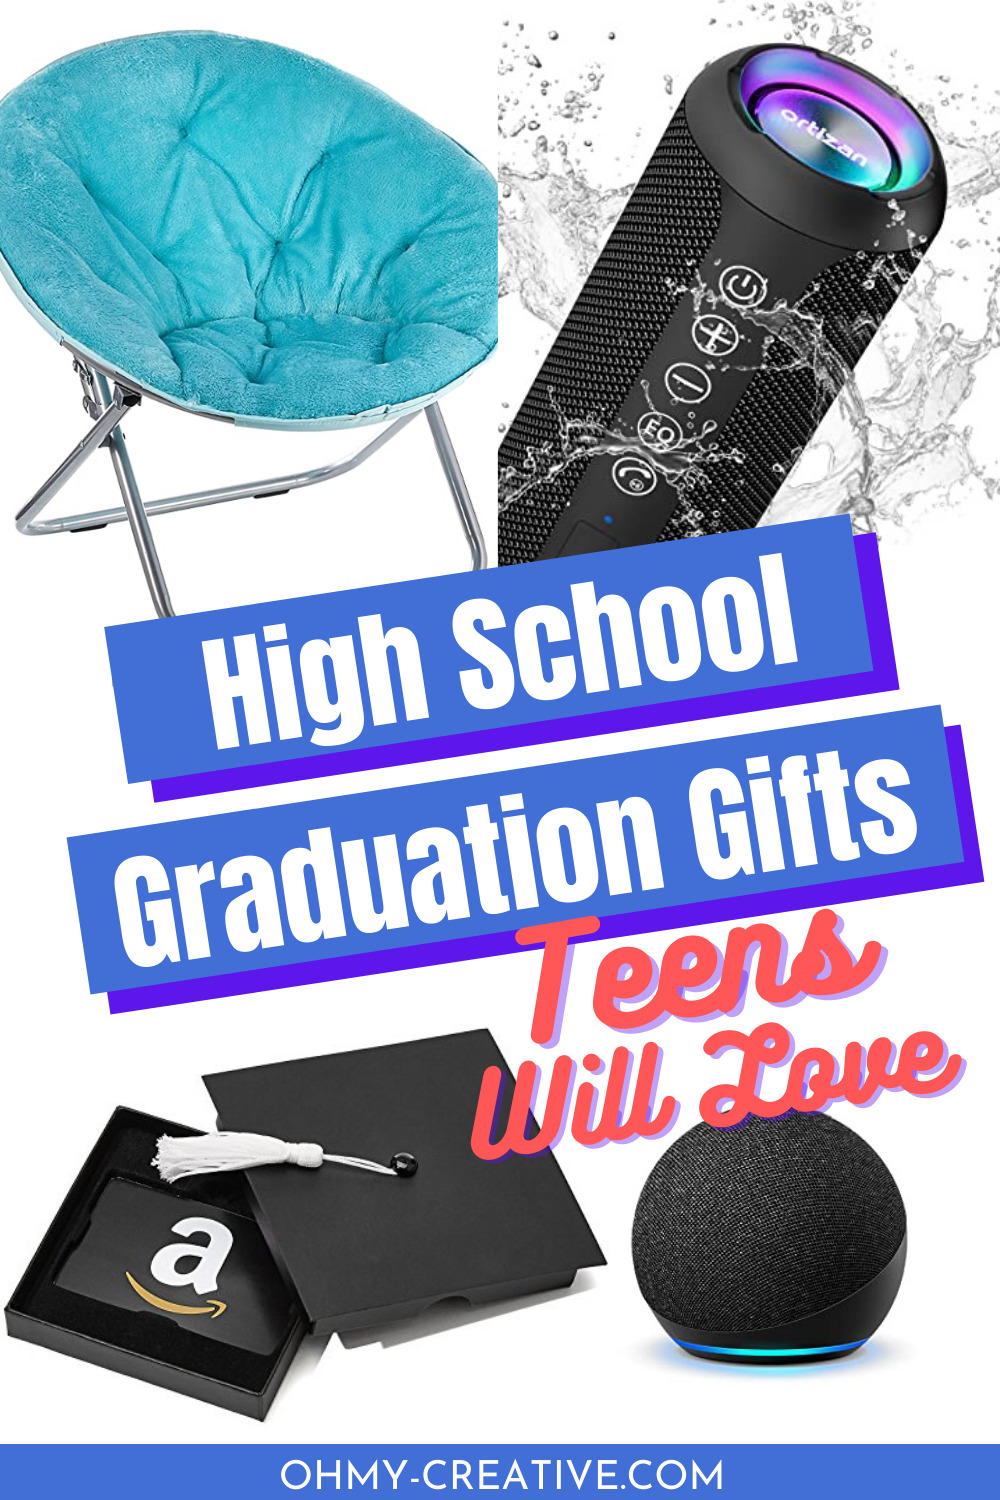 A collage of great high school graduation gifts for teens